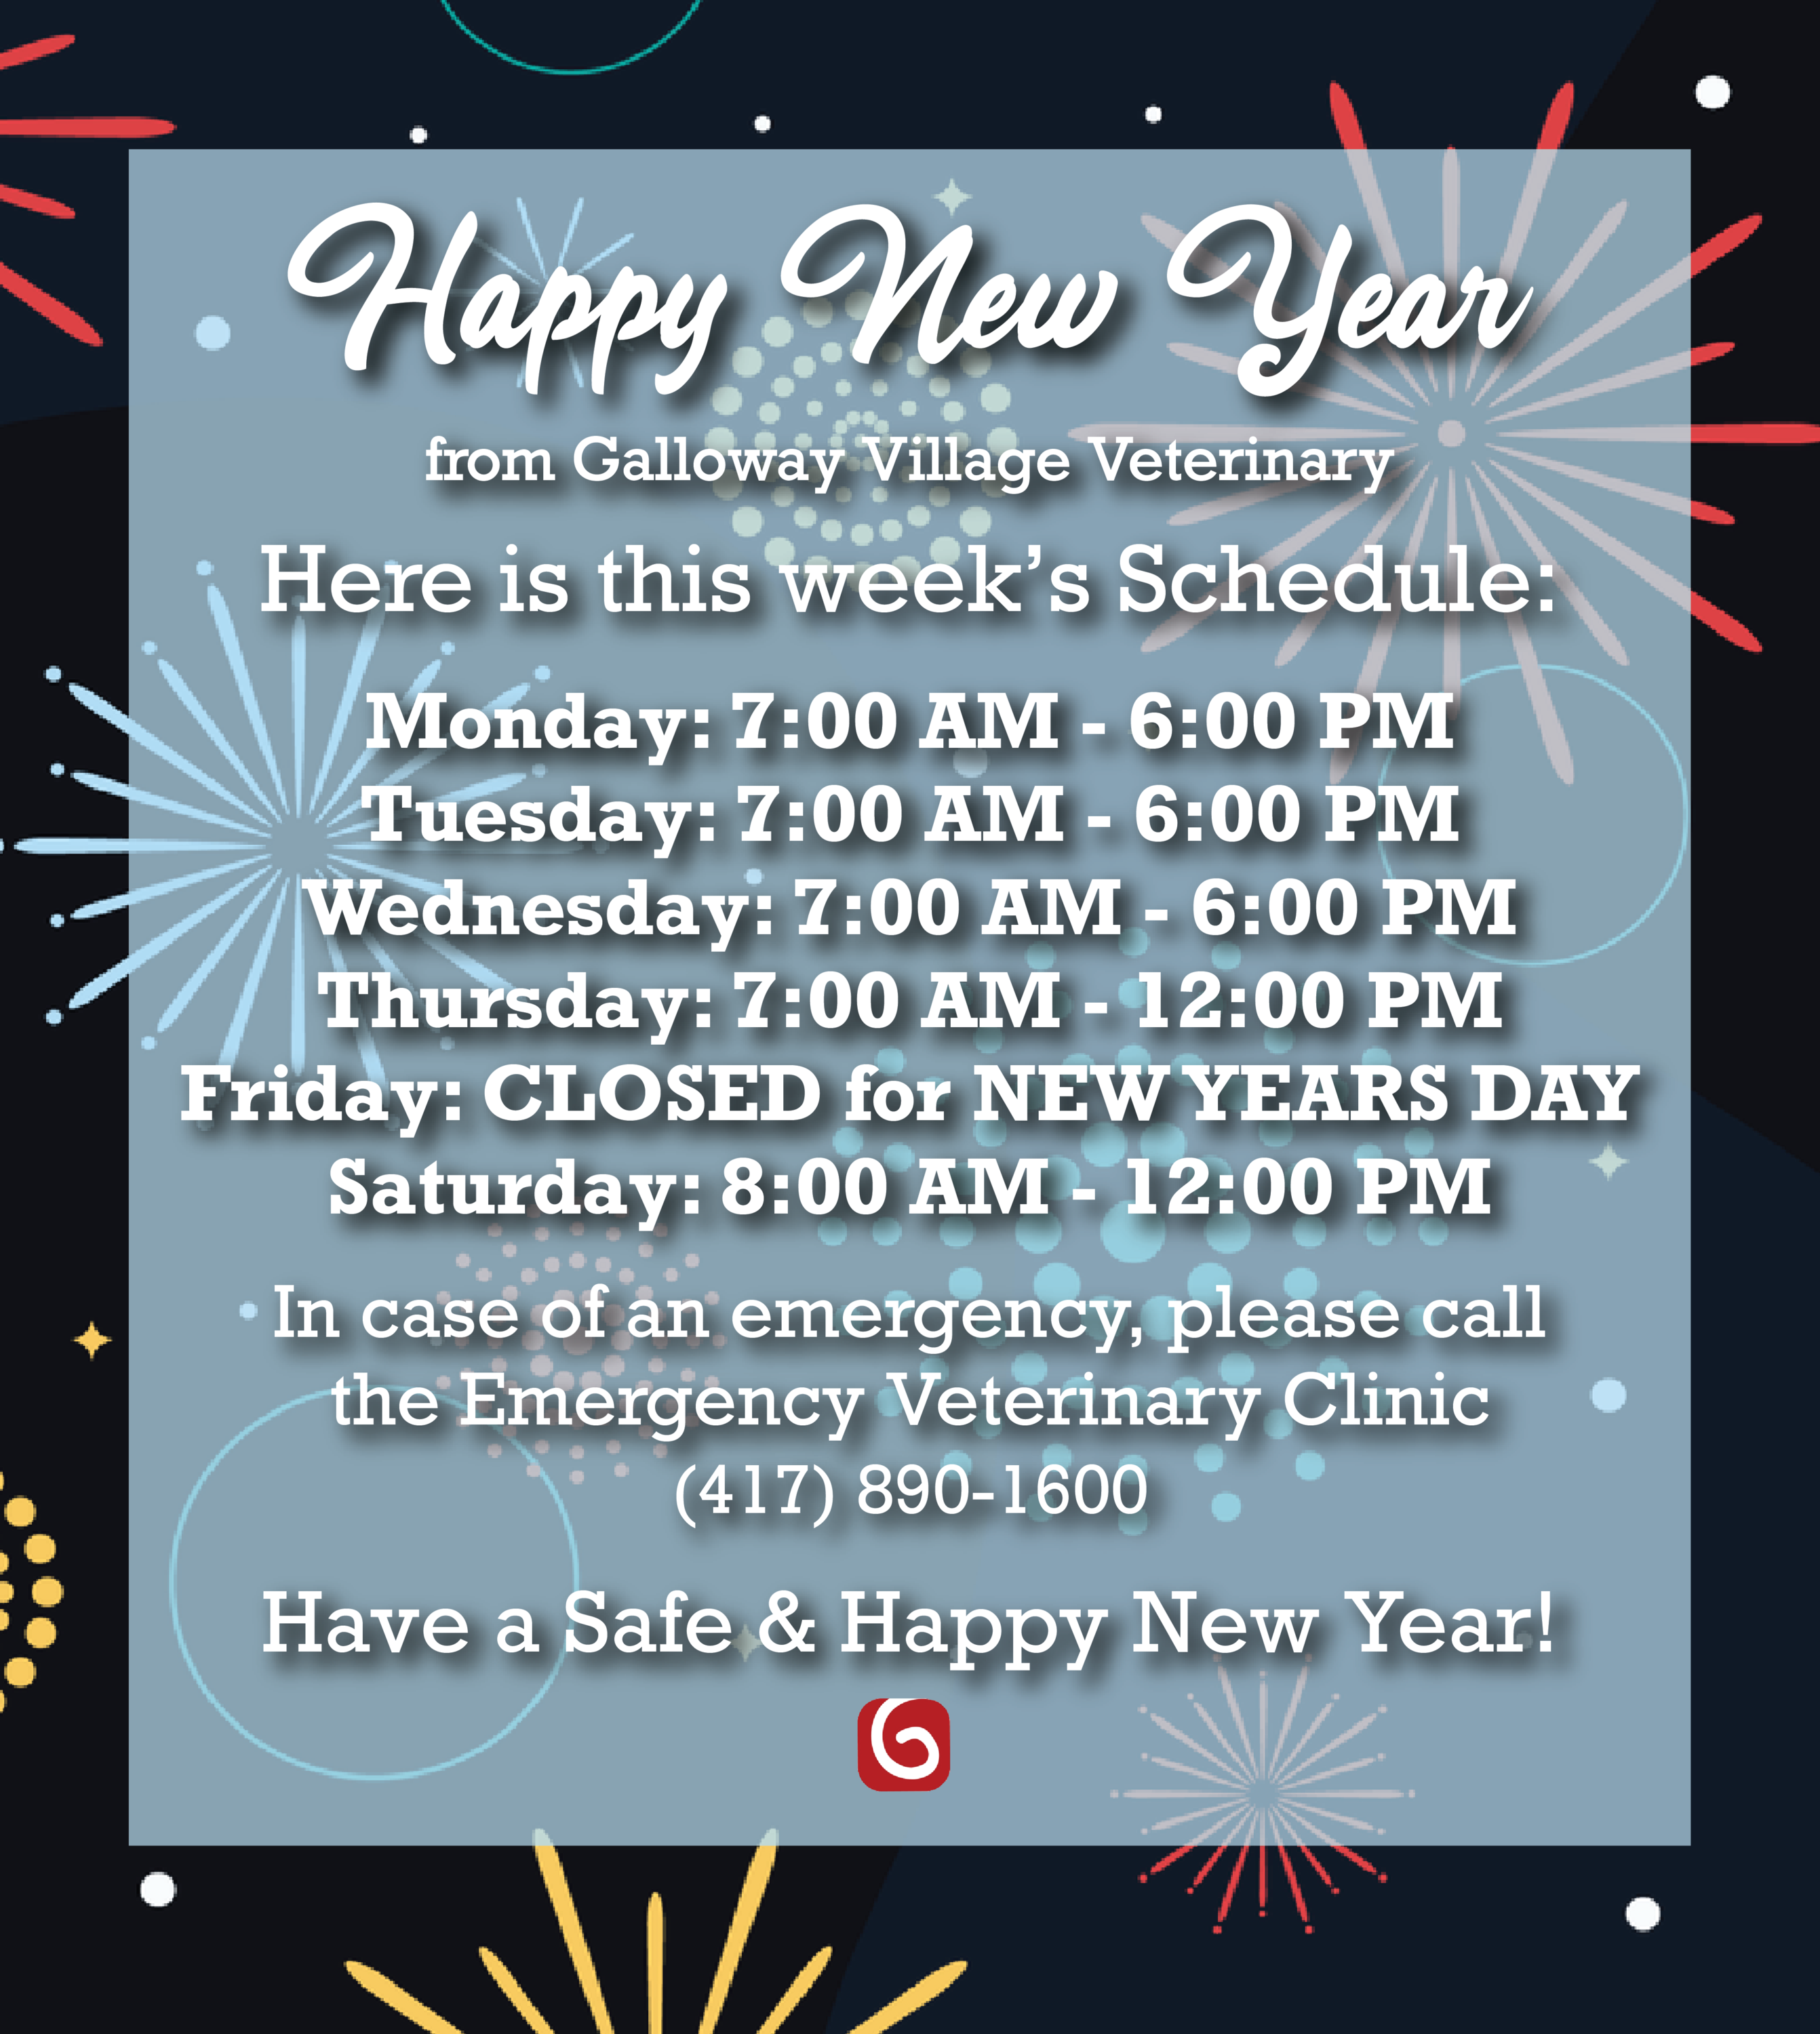 Galloway Village Veterinary's schedule is different this week due to the New Year holiday.